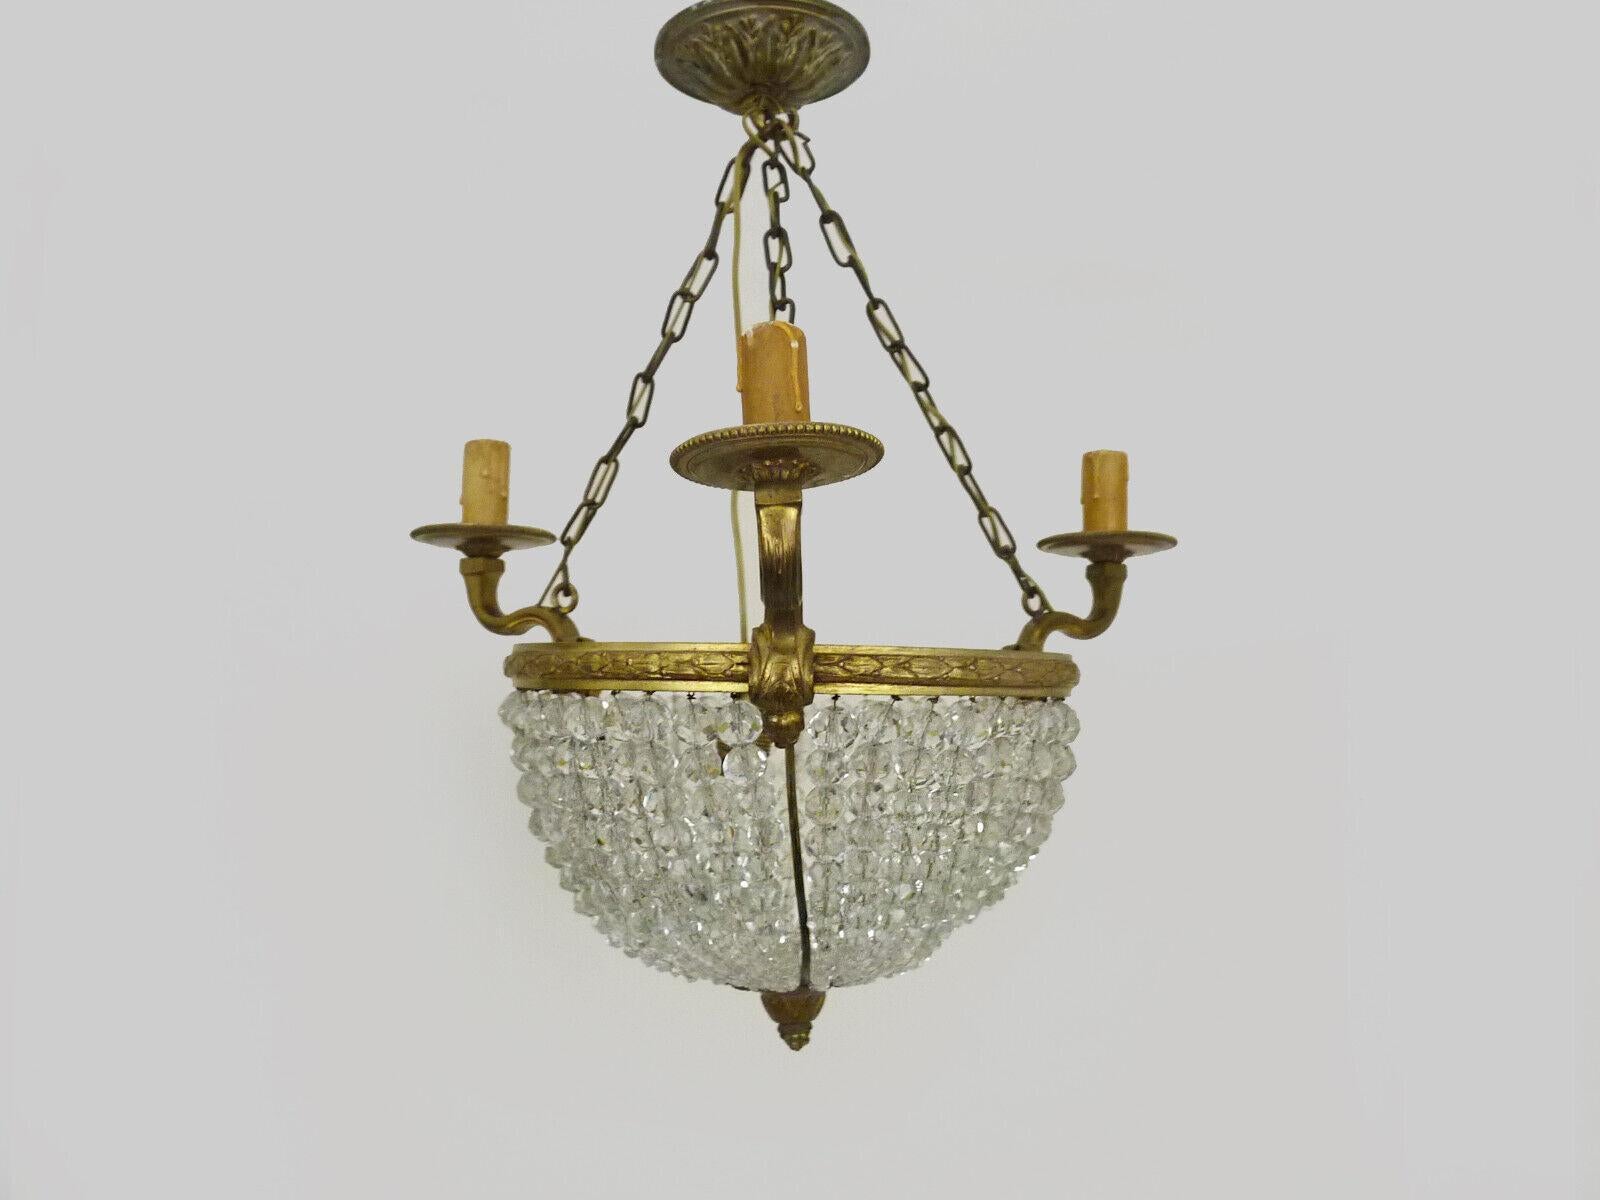 Beautiful 19thc French Antique Napoleon III Gilt Bronze Cut Crystal Beaded Chandelier/ Pendant. French buying trip acquisition.